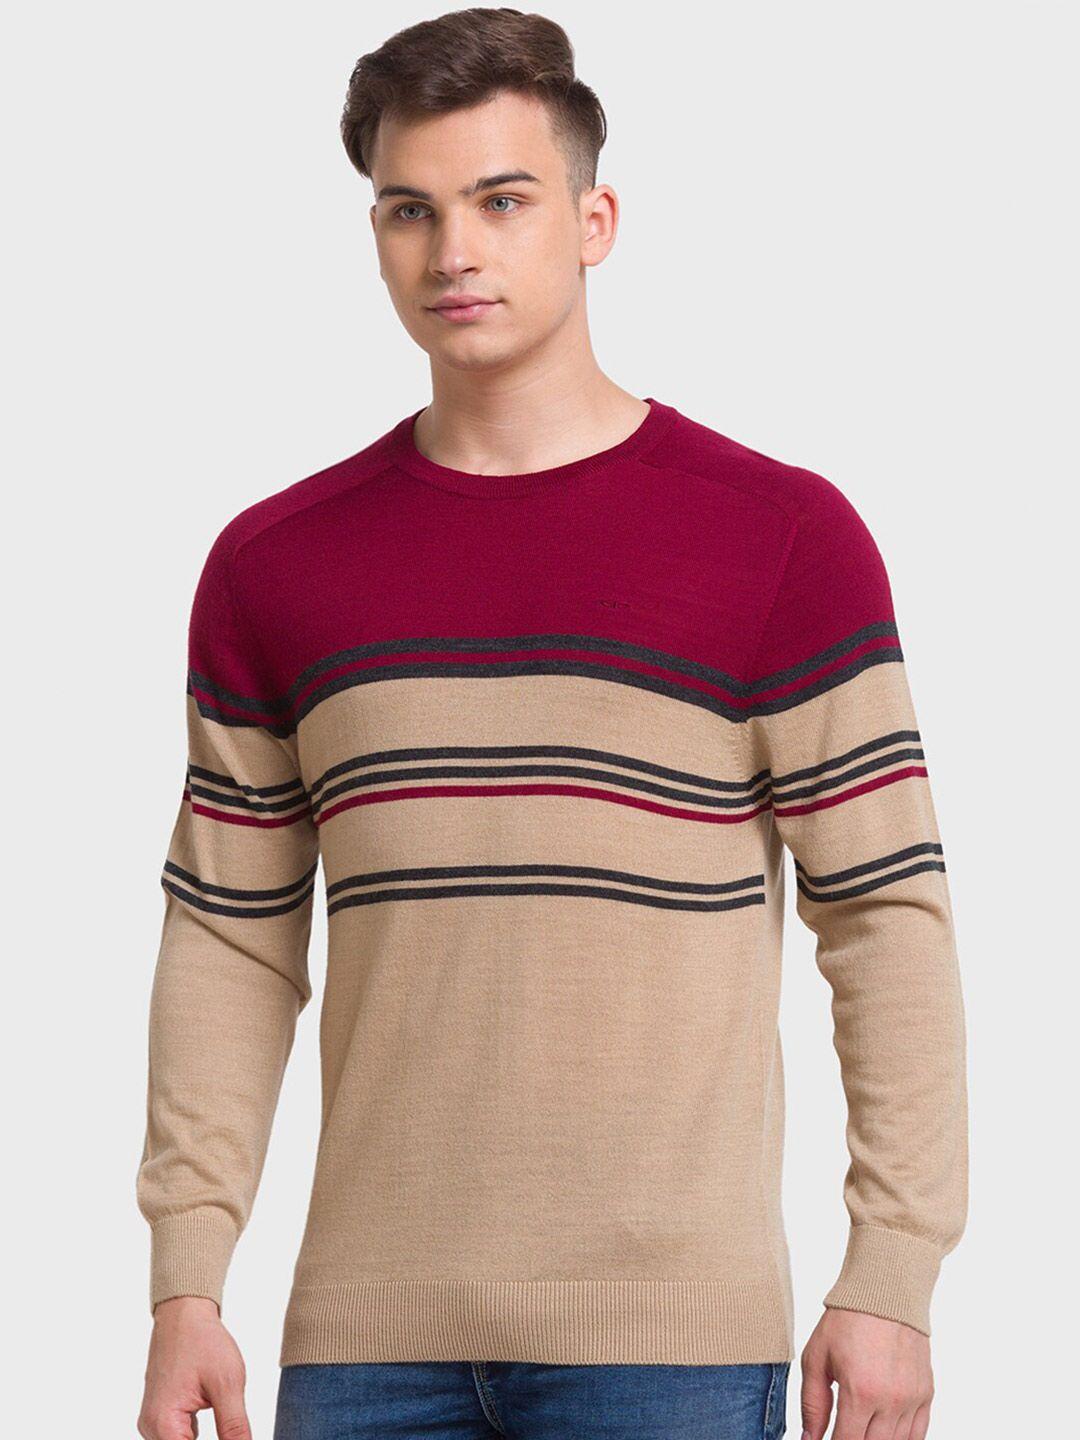 colorplus-tailored-fit-striped-woollen-pullover-sweater